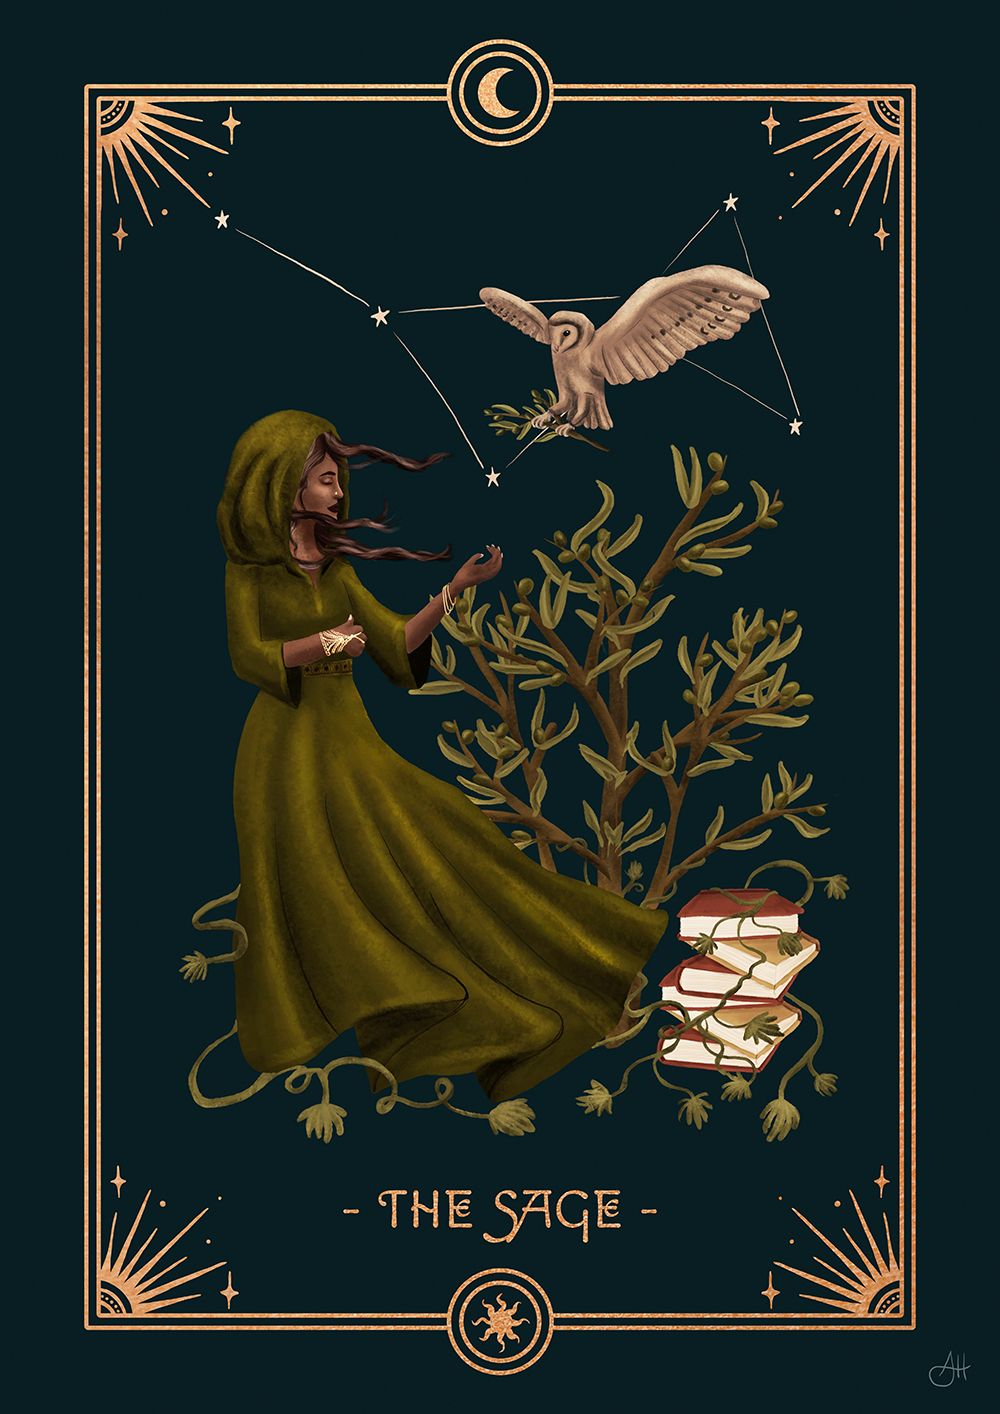 Illustrations of the 7 Feminine Archetypes by Anna Heimkreiter. "The Sage" shows a wise woman surrounded by books, an olive tree and an owl.